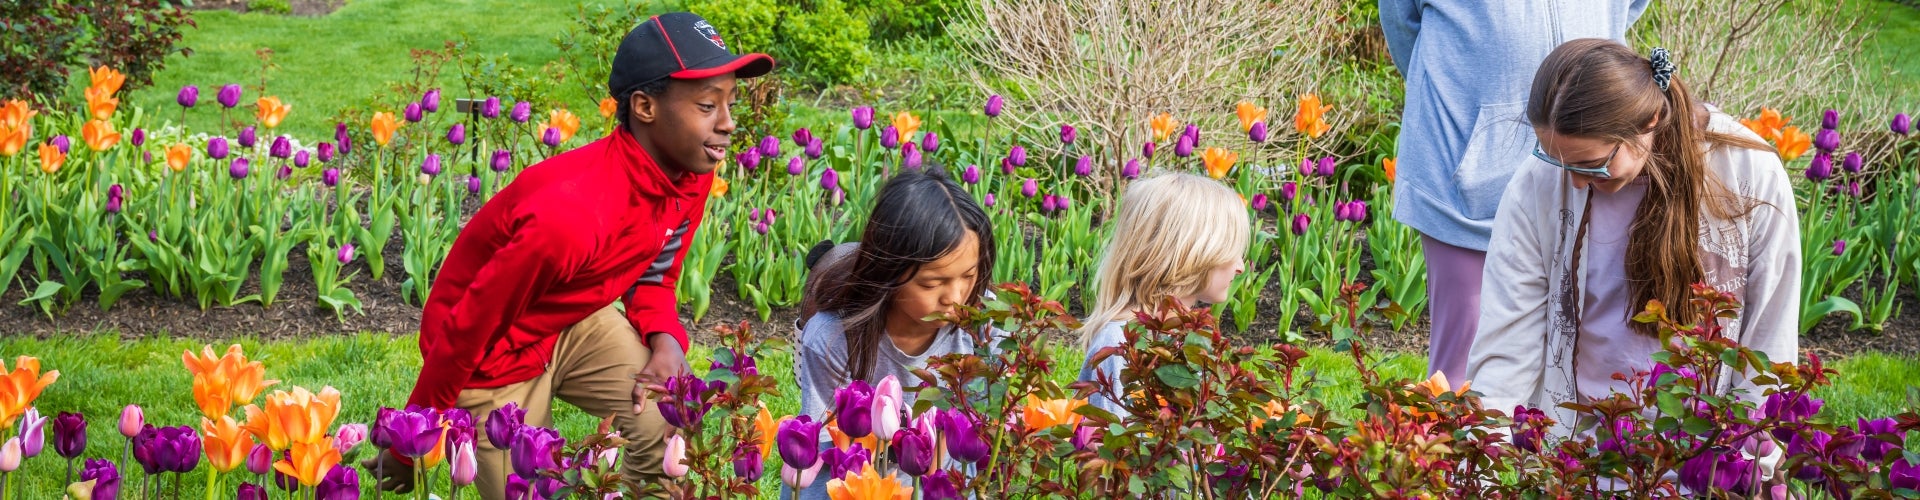 A group of children and two adults admire a garden of tulips.